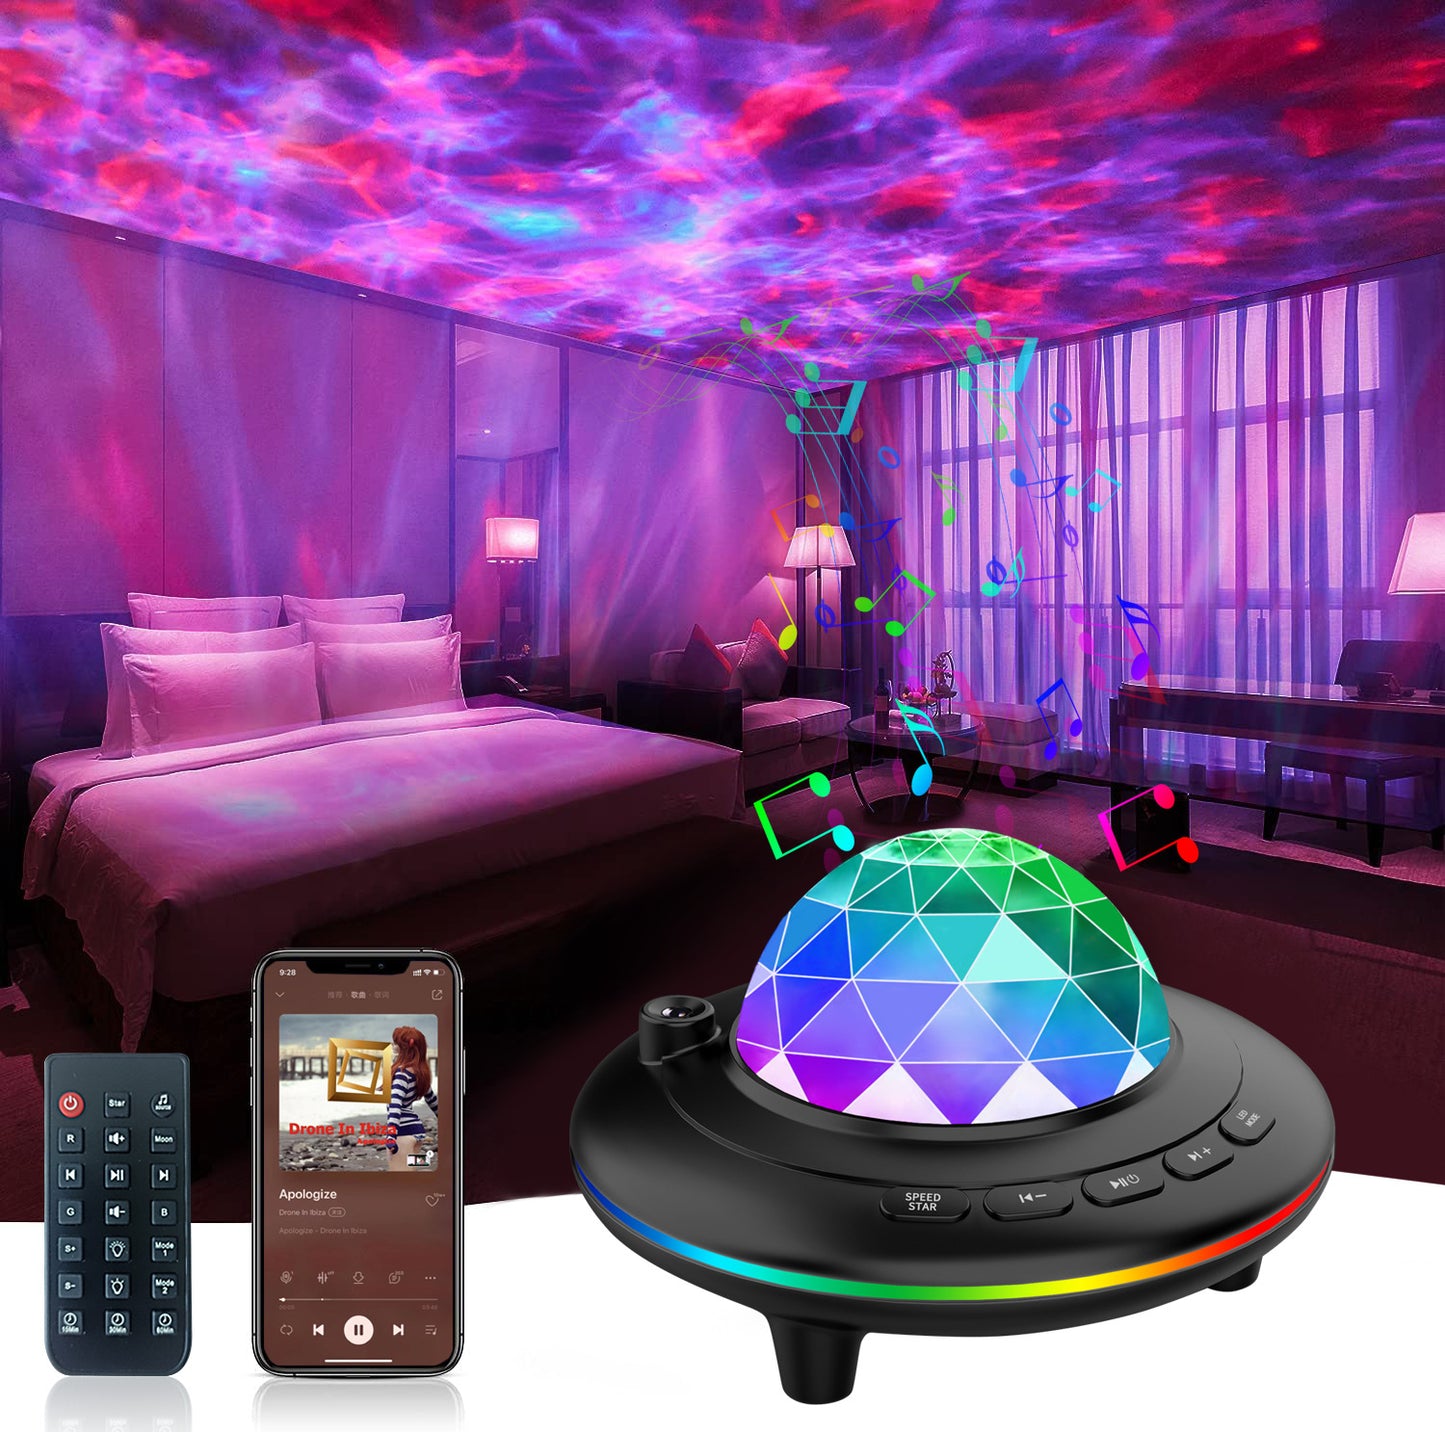 LED star projector galaxy starry atmosphere projection lamp remote control bluetooth laser laser bedroom night light